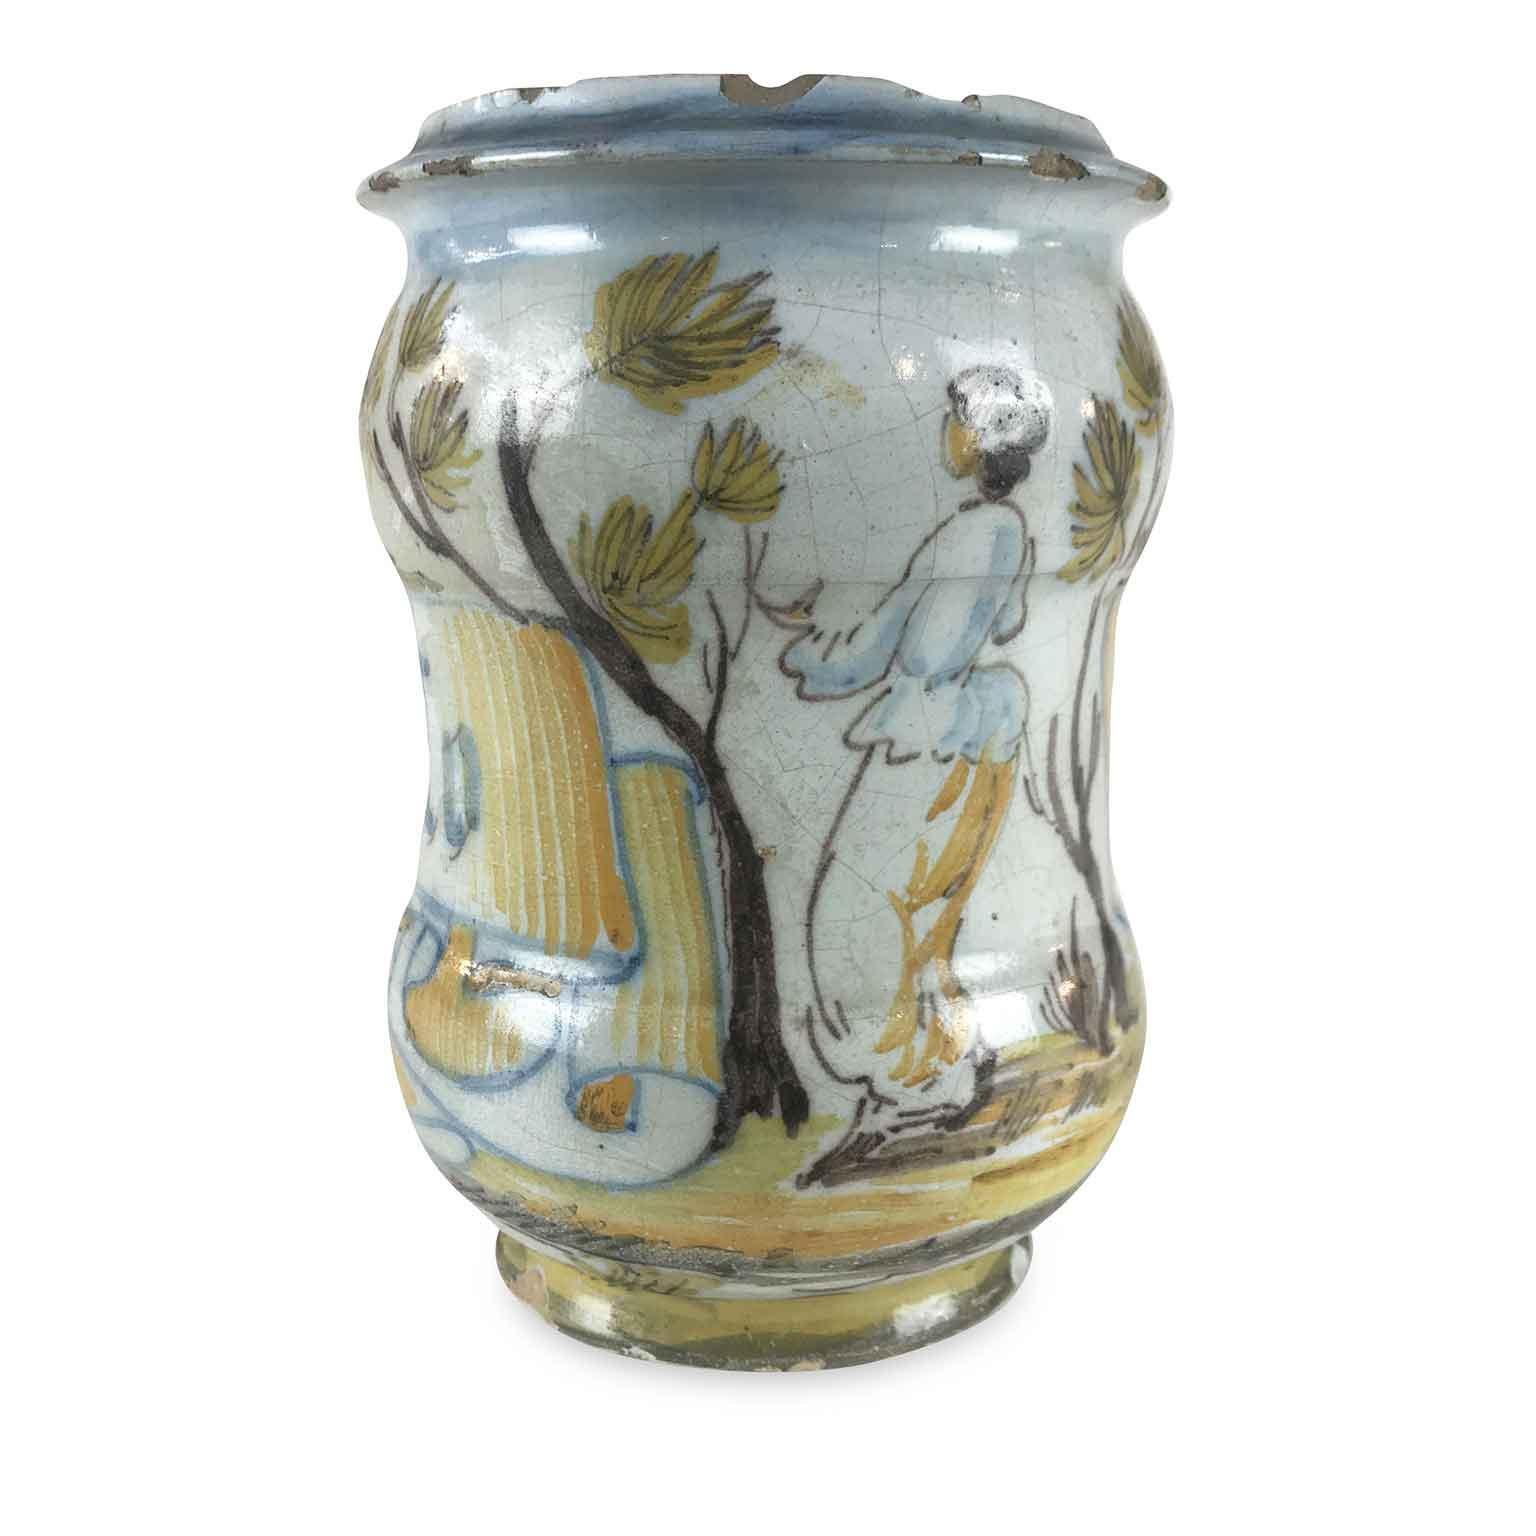 18th Century Italian Majolica Albarello Drug Jar by Jacques Boselly For Sale 3